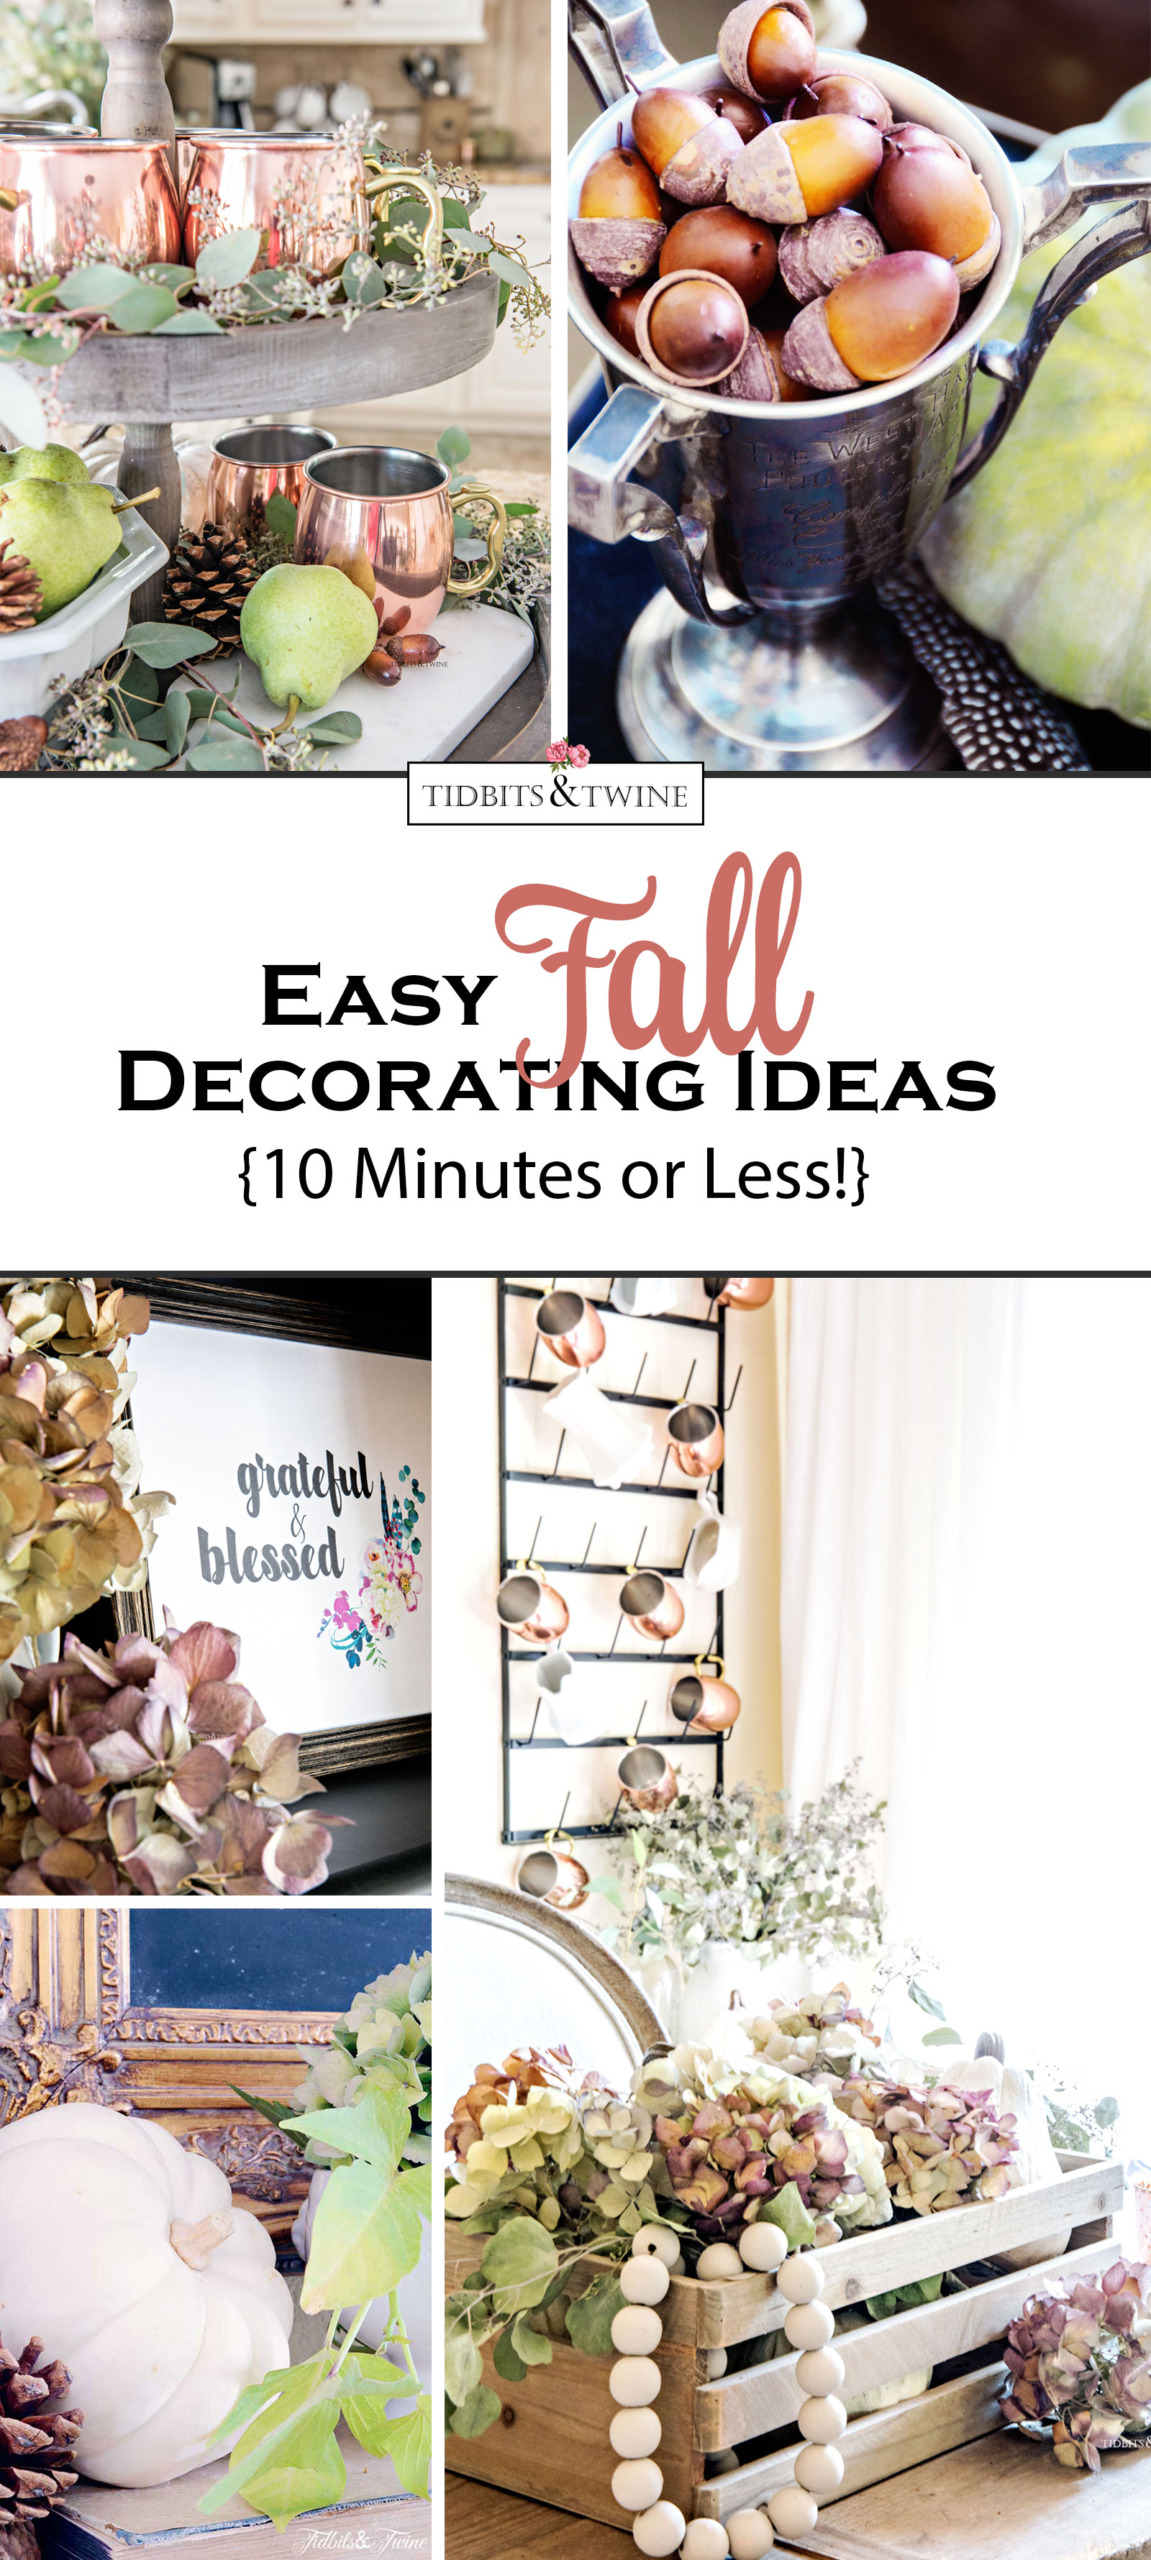 Easy Fall Decorating Ideas – 10 Minutes or Less